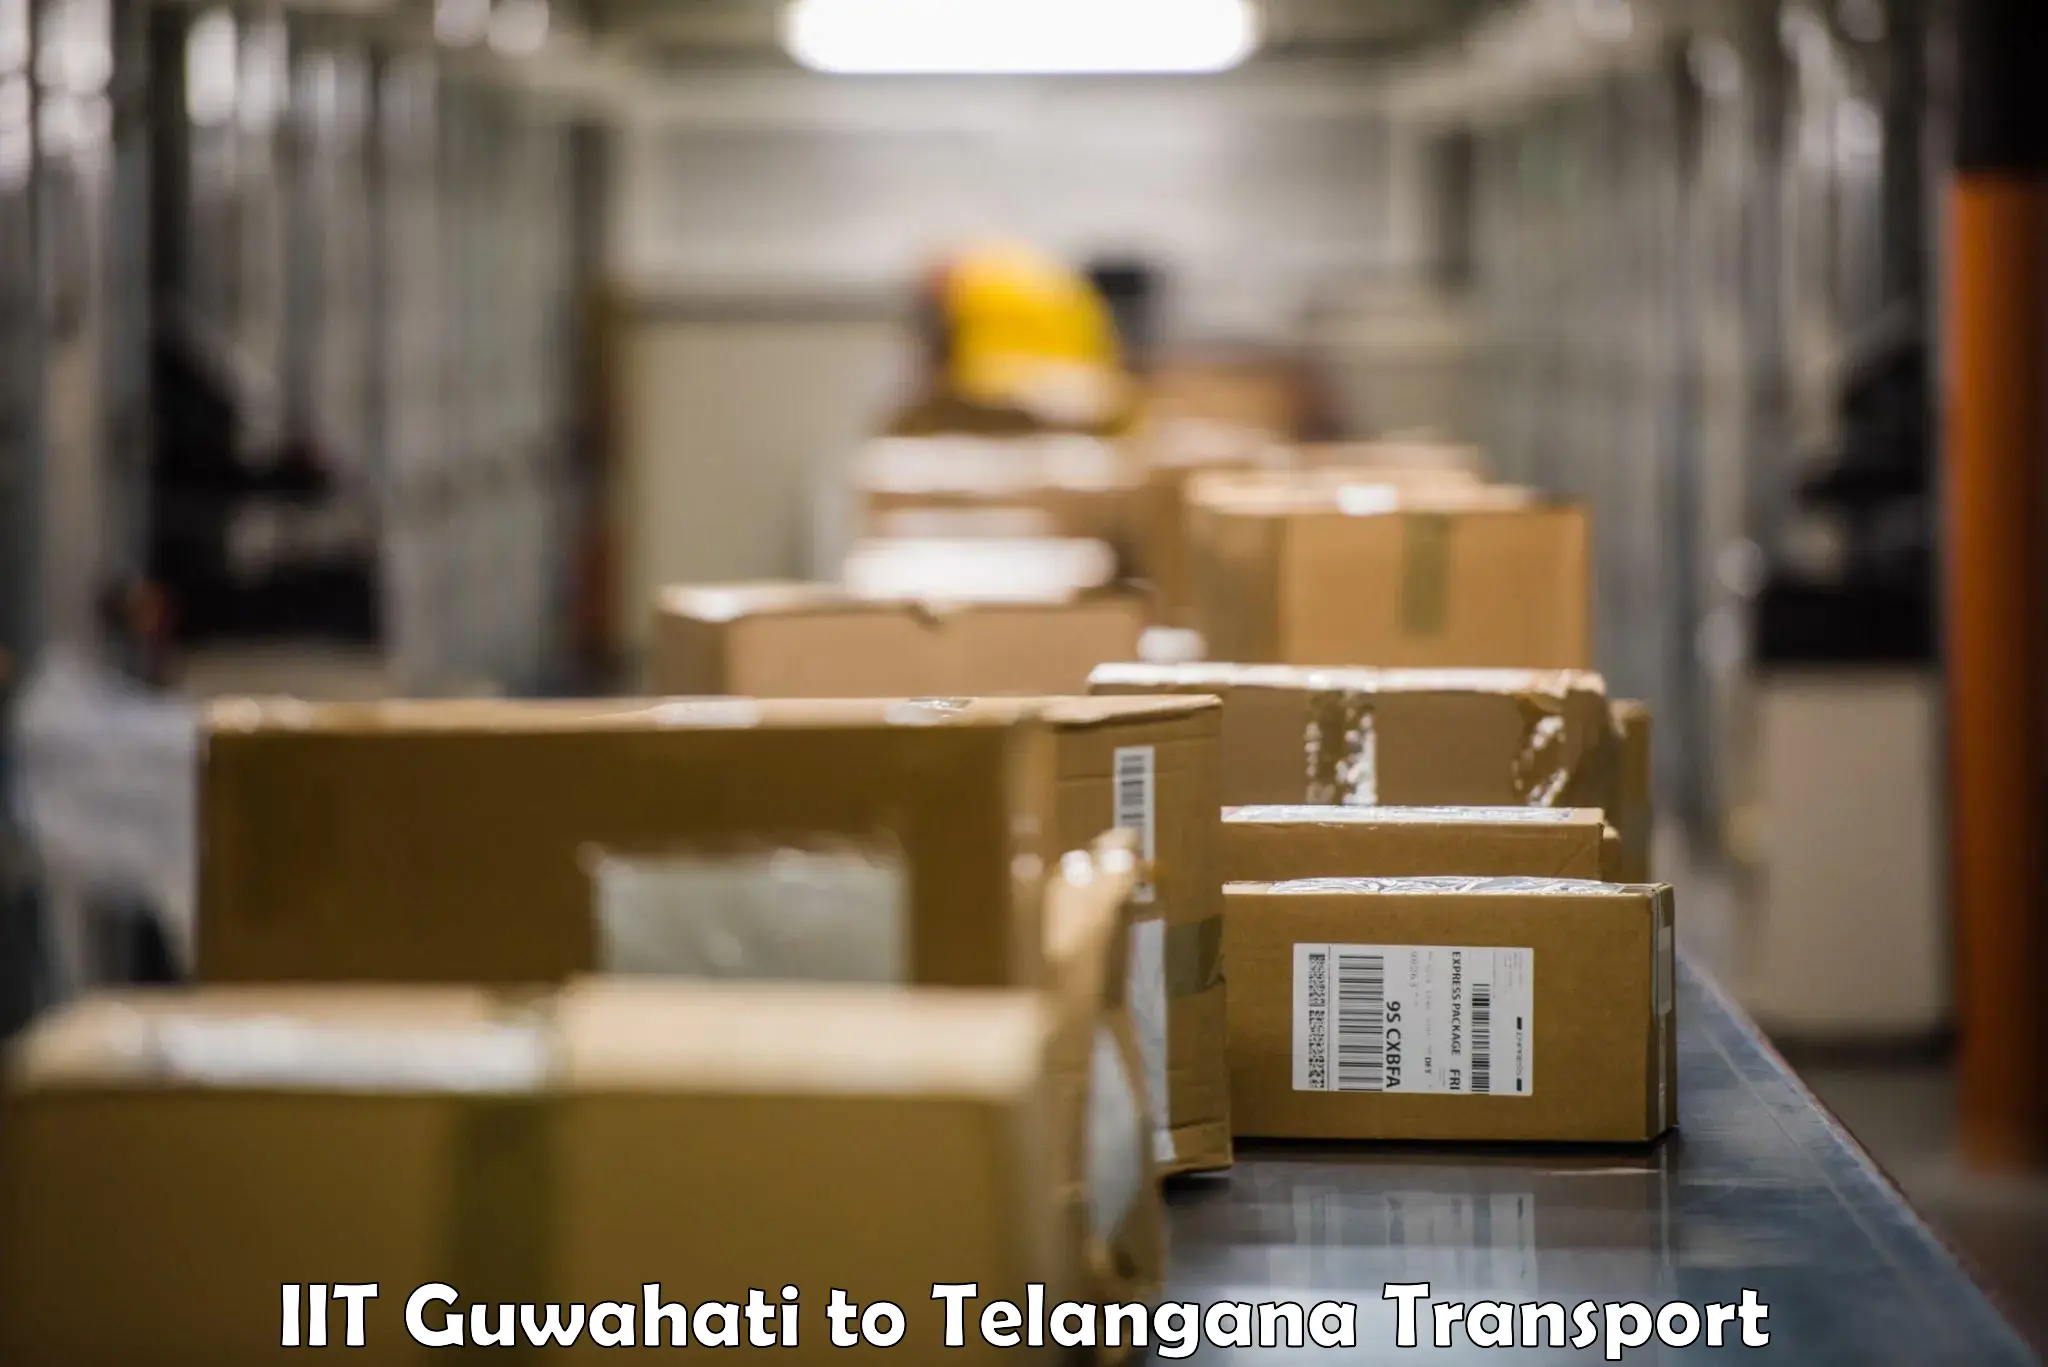 Commercial transport service IIT Guwahati to Allapalli